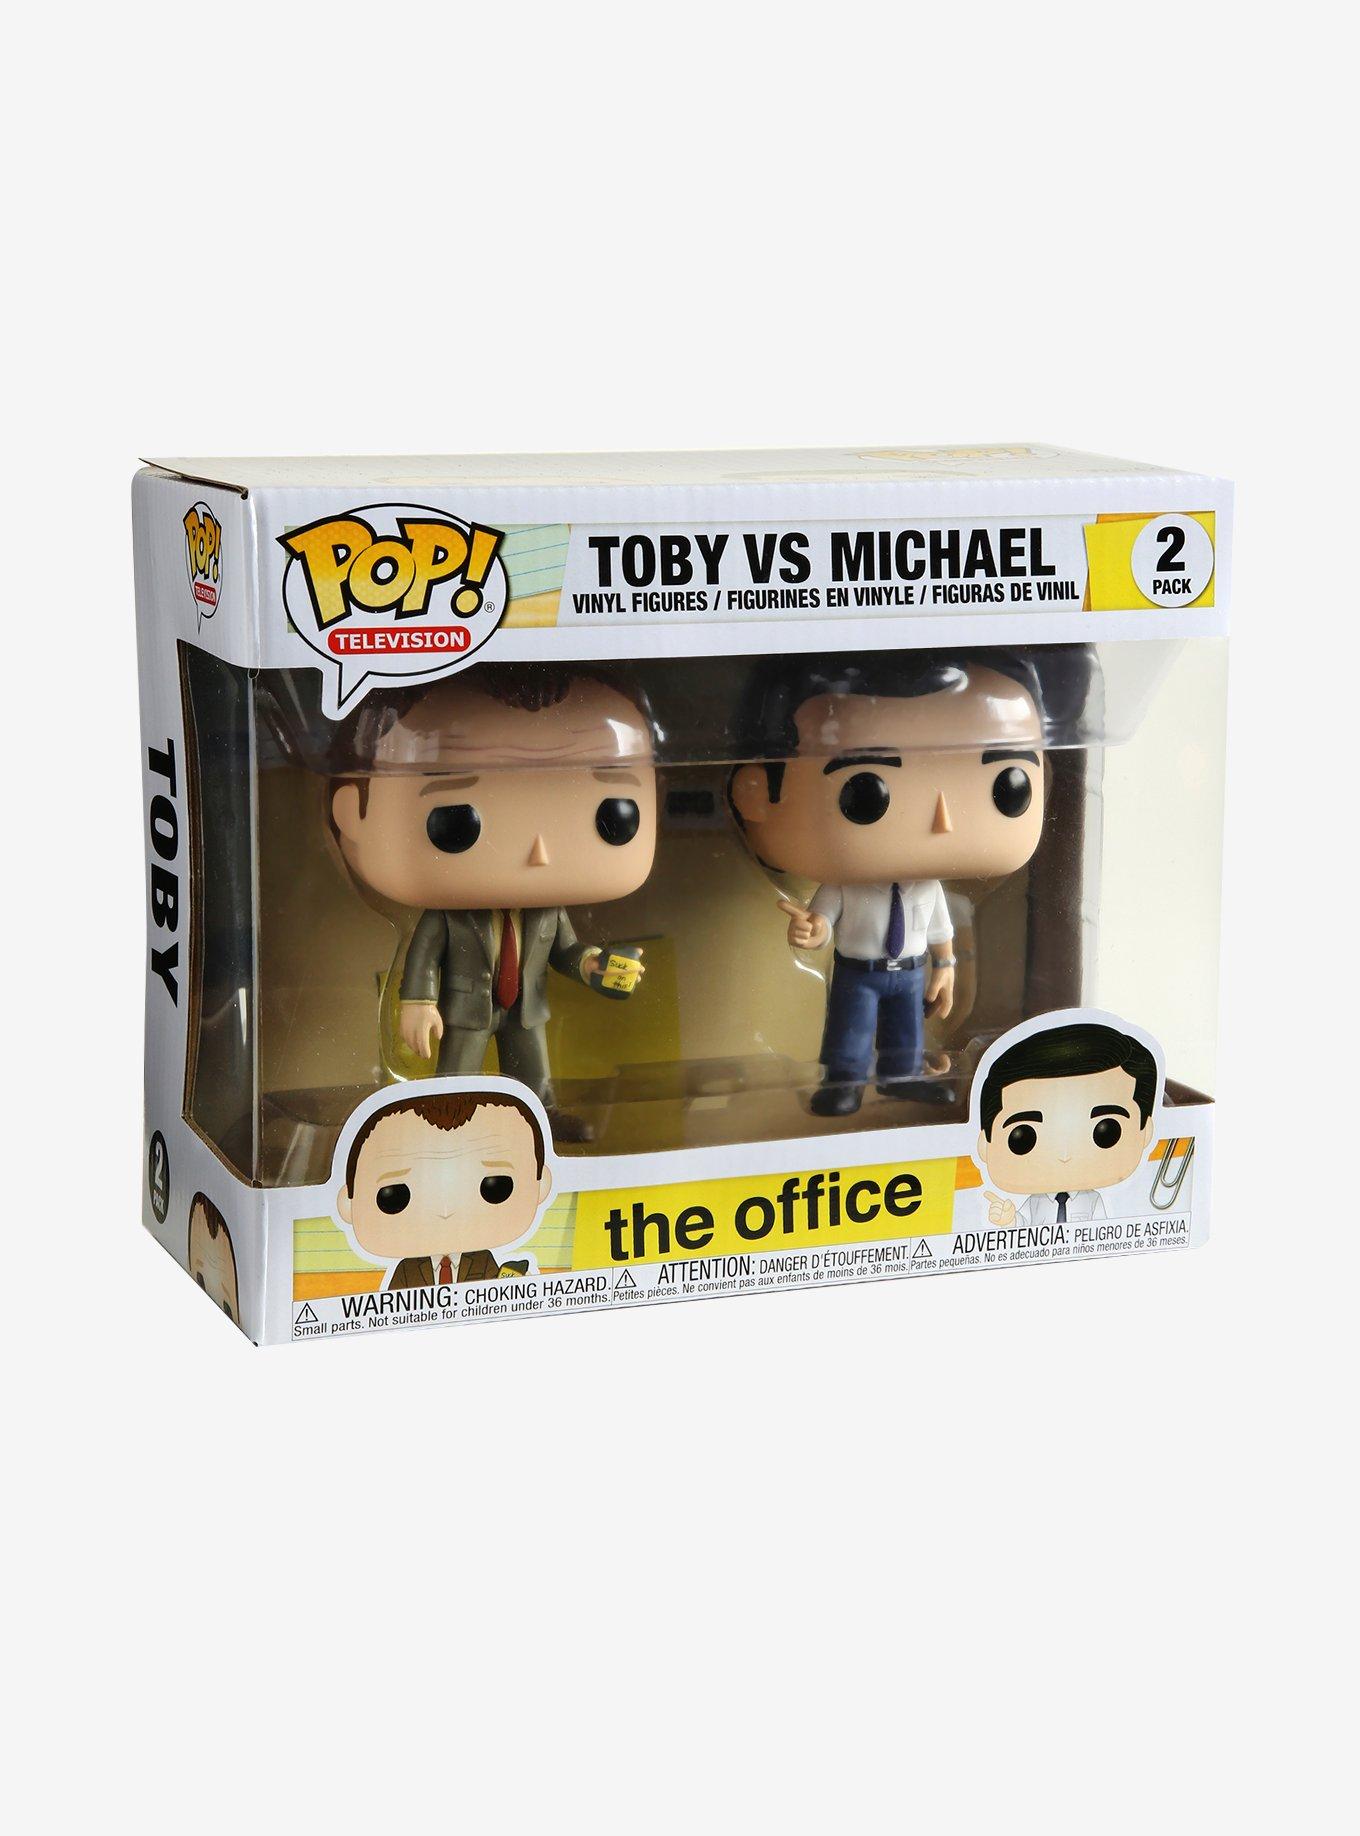 Super Secret Fun Club Toby The Office “Suck on This” Collectible